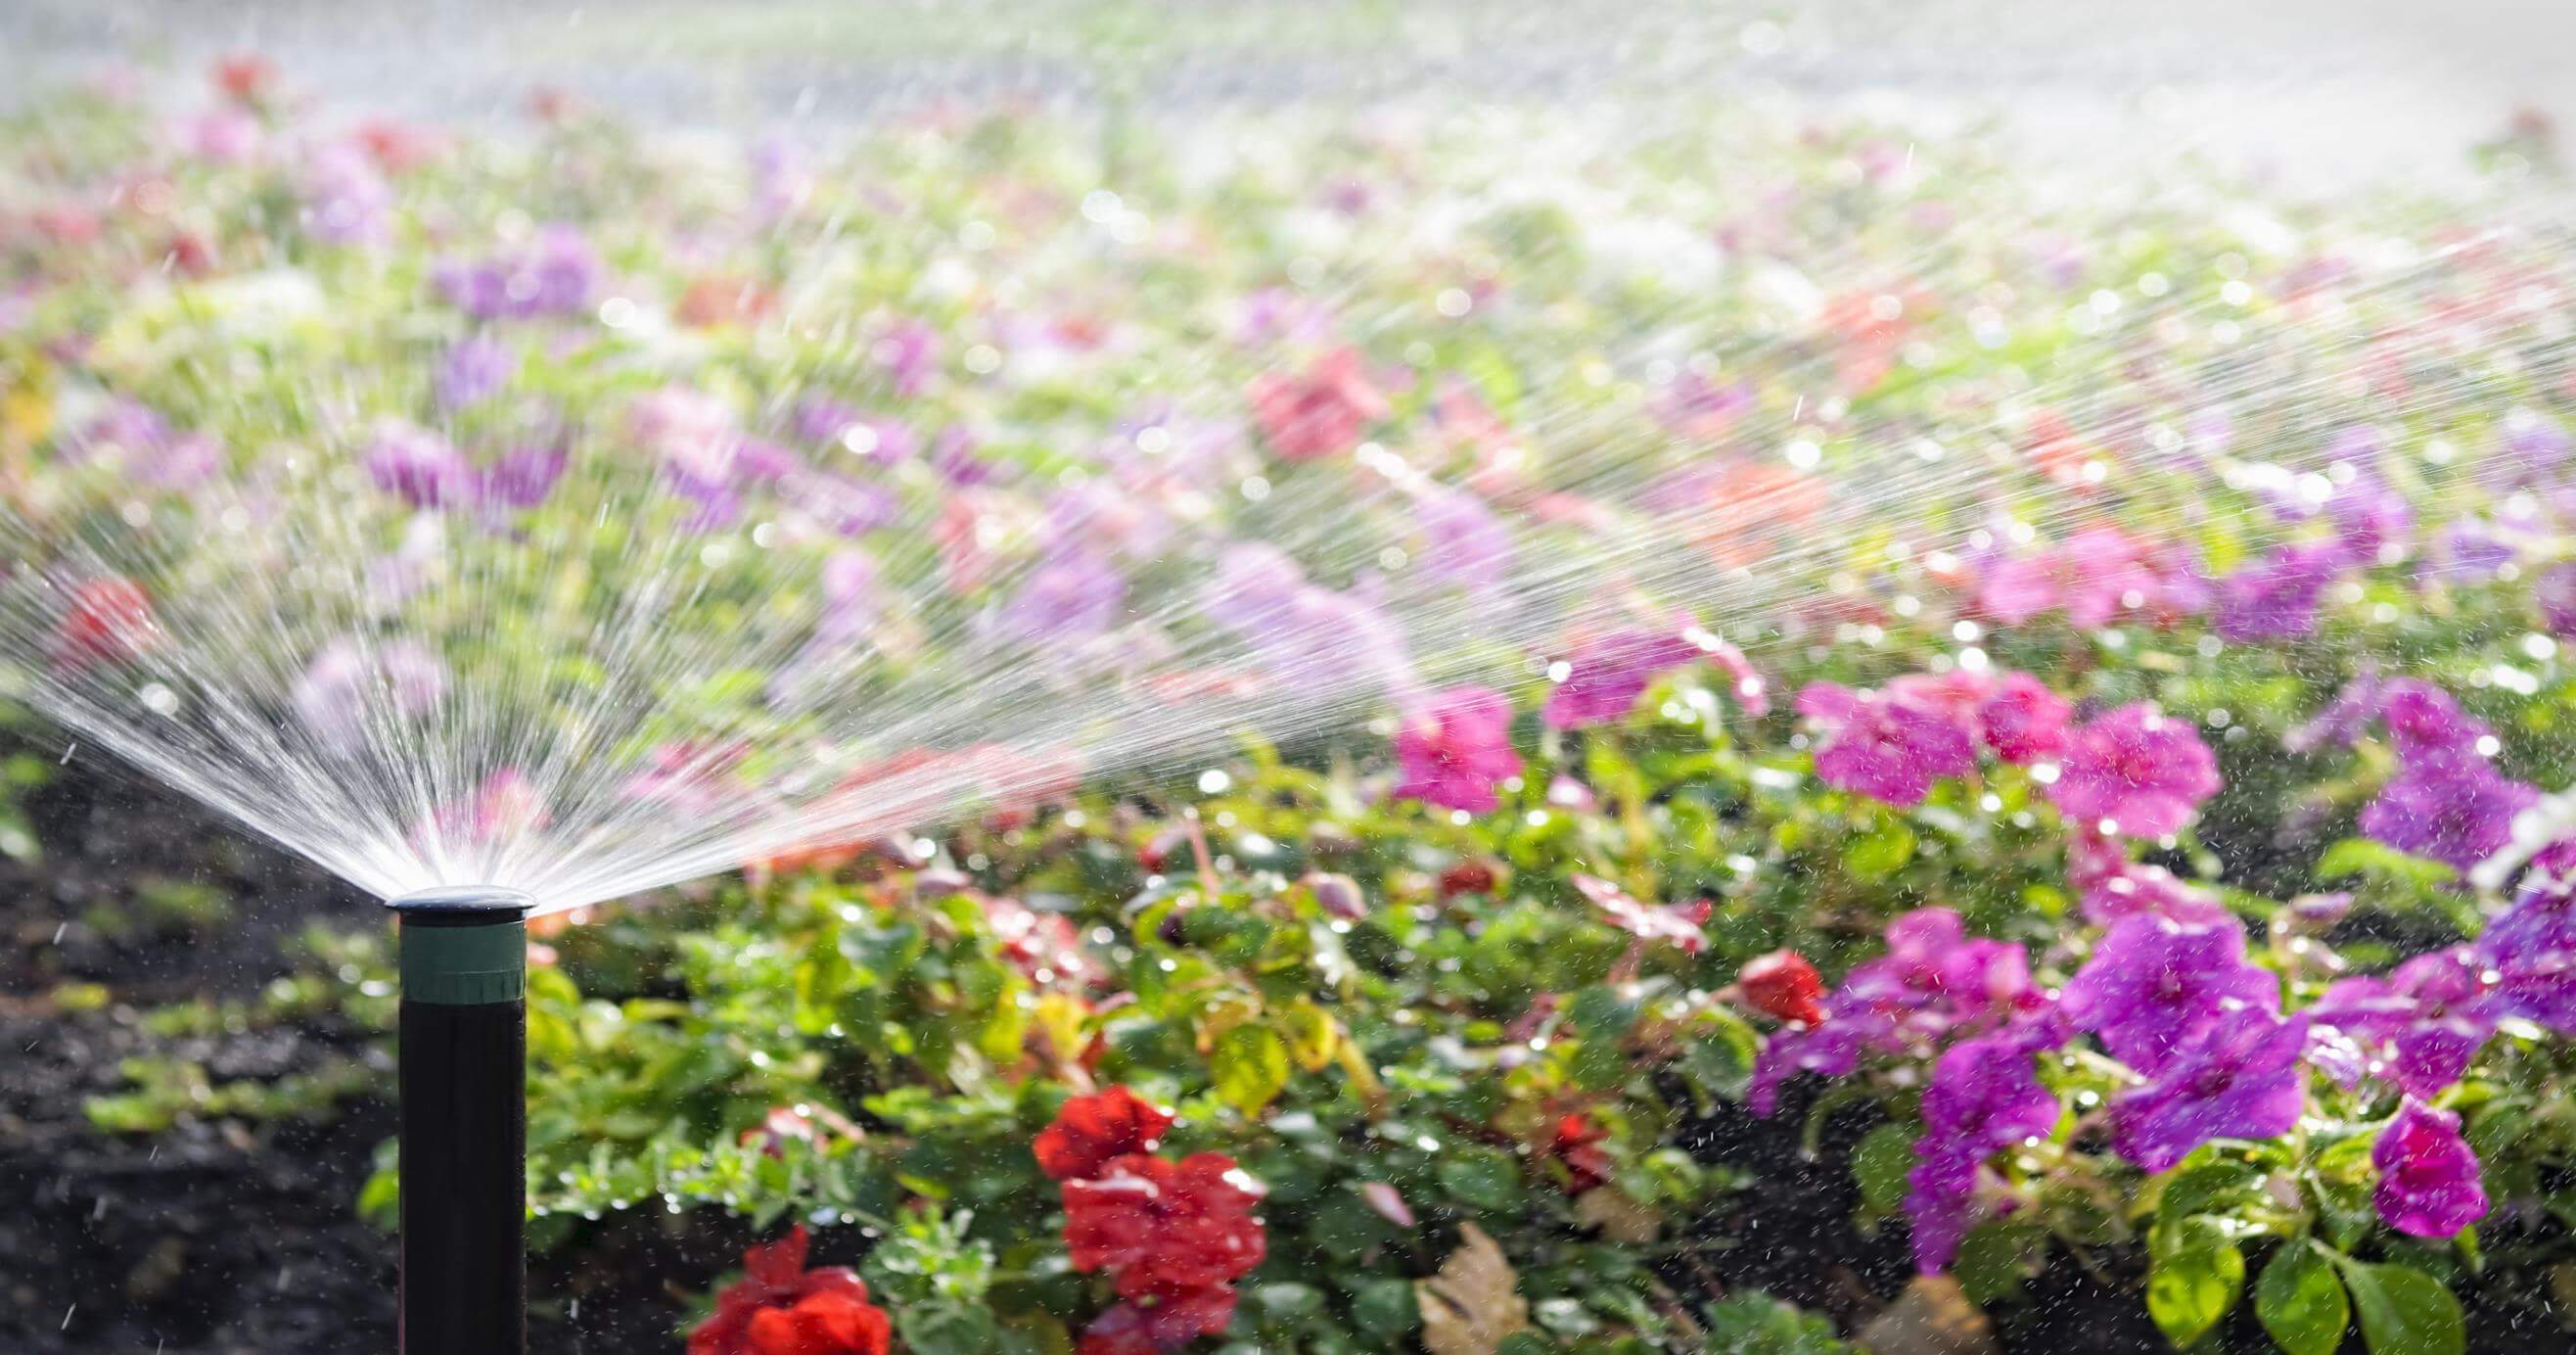 How to Install Sprinklers